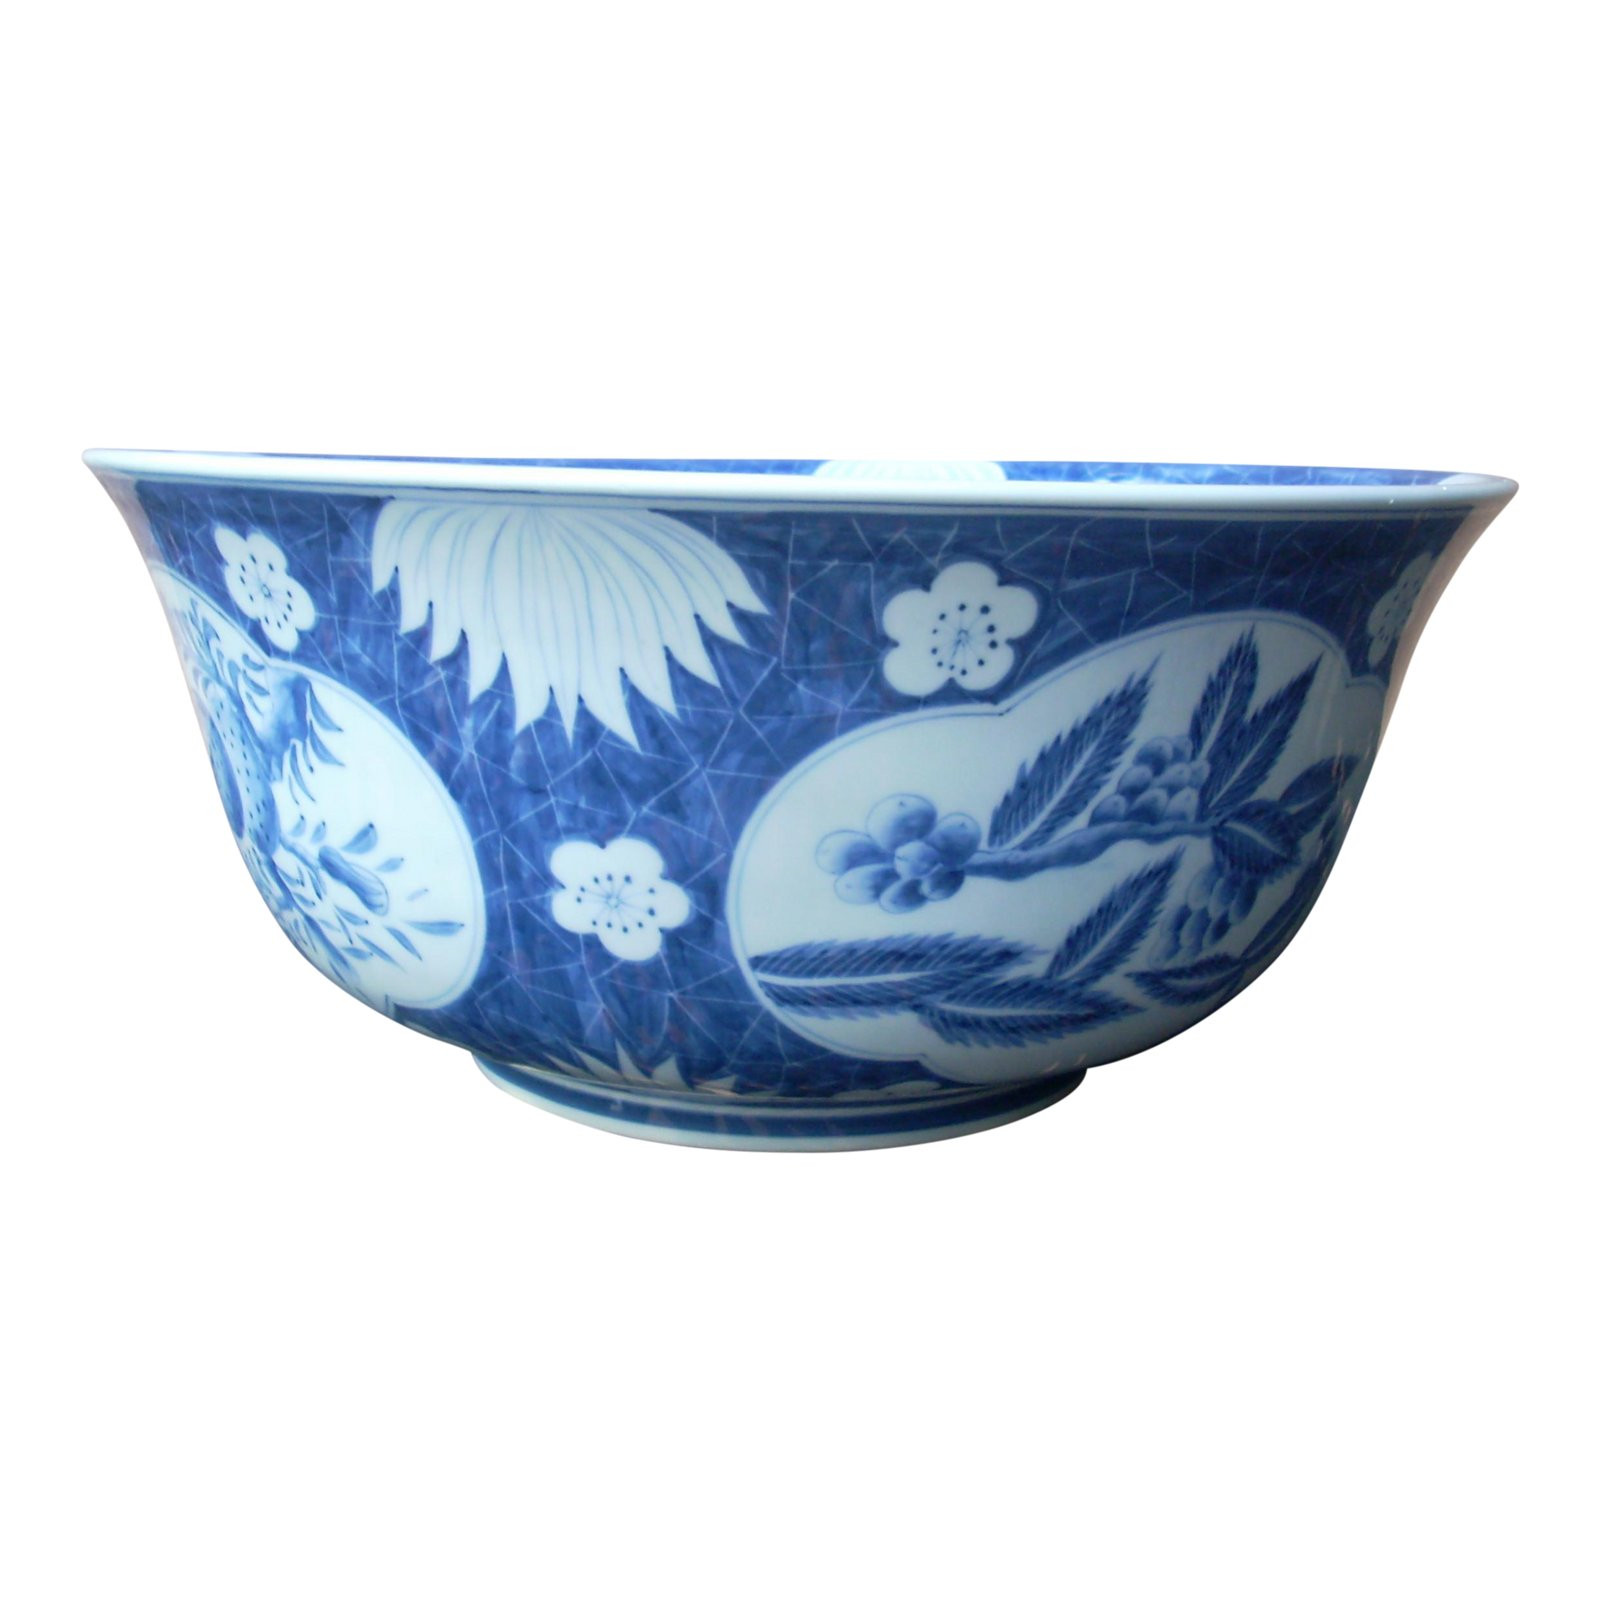 16 Famous Maitland Smith Ltd Vase 2024 free download maitland smith ltd vase of maitland smith blue white bowl chairish with regard to maitland smith blue and white bowl 6917